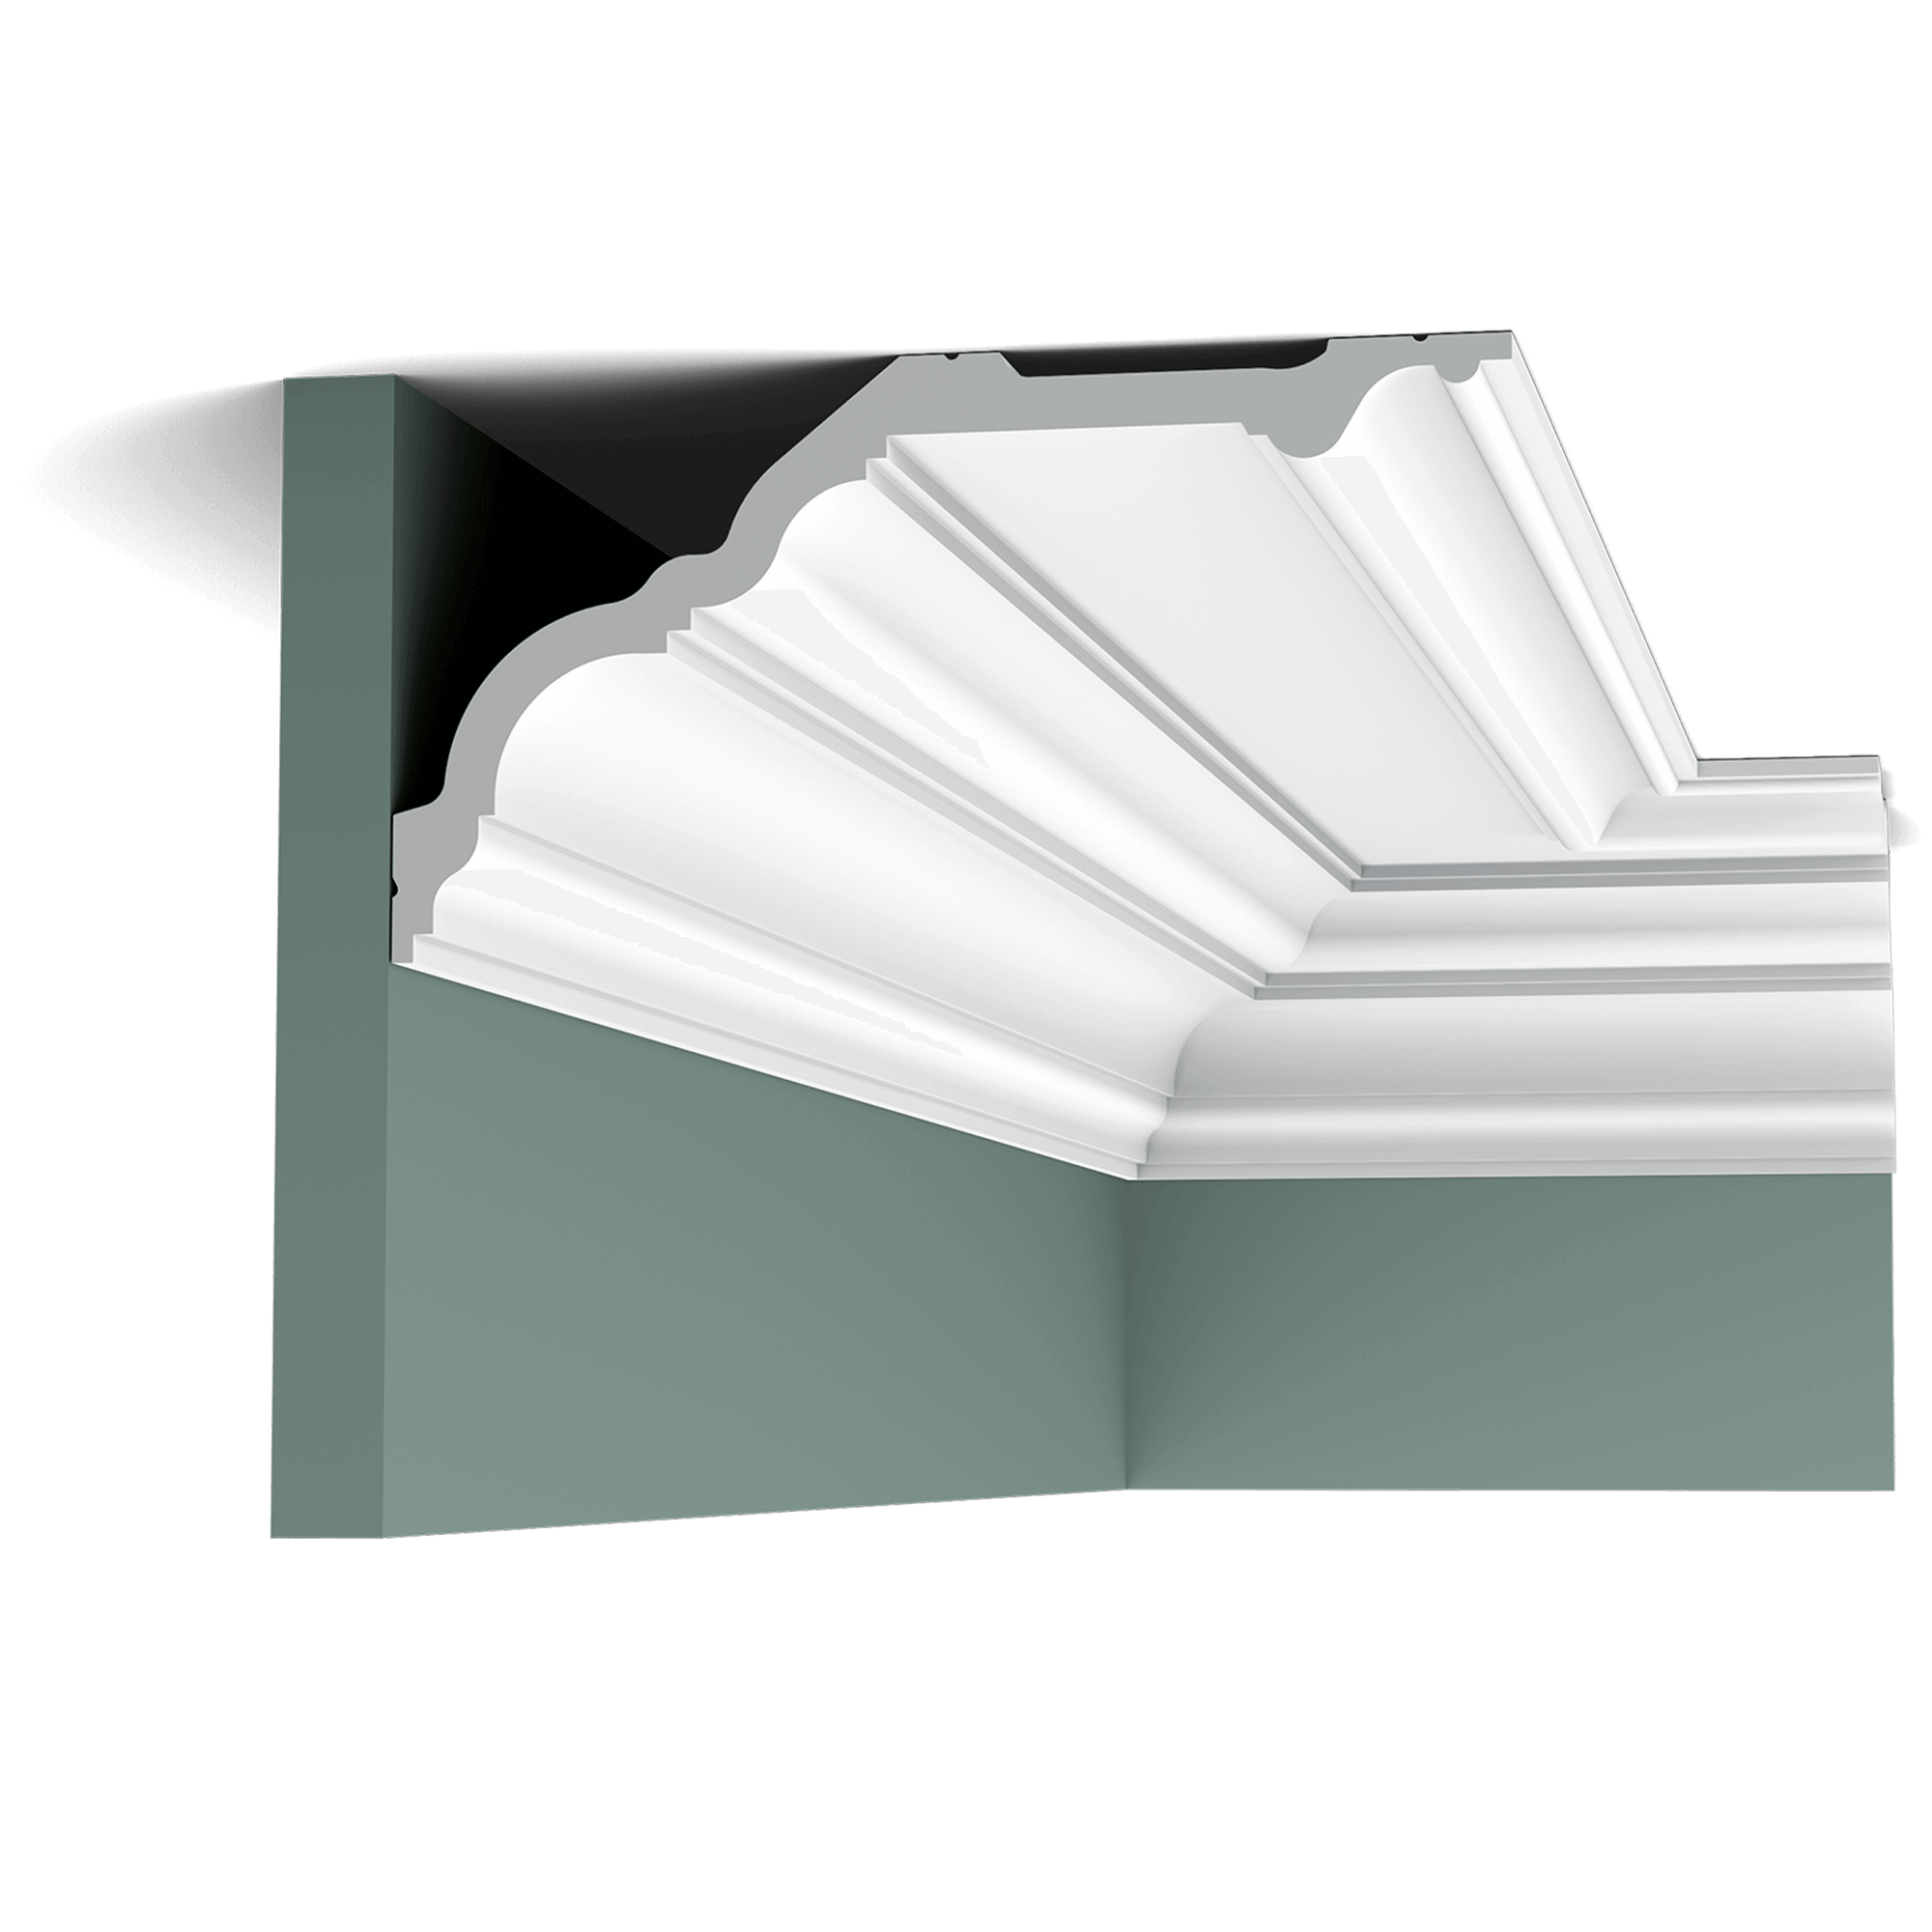 c340 cornice moulding 341b The design of this large Cotswold model allows the moulding to be mounted in two ways. Here we fix the largest section to the wall, making the space seem wider.